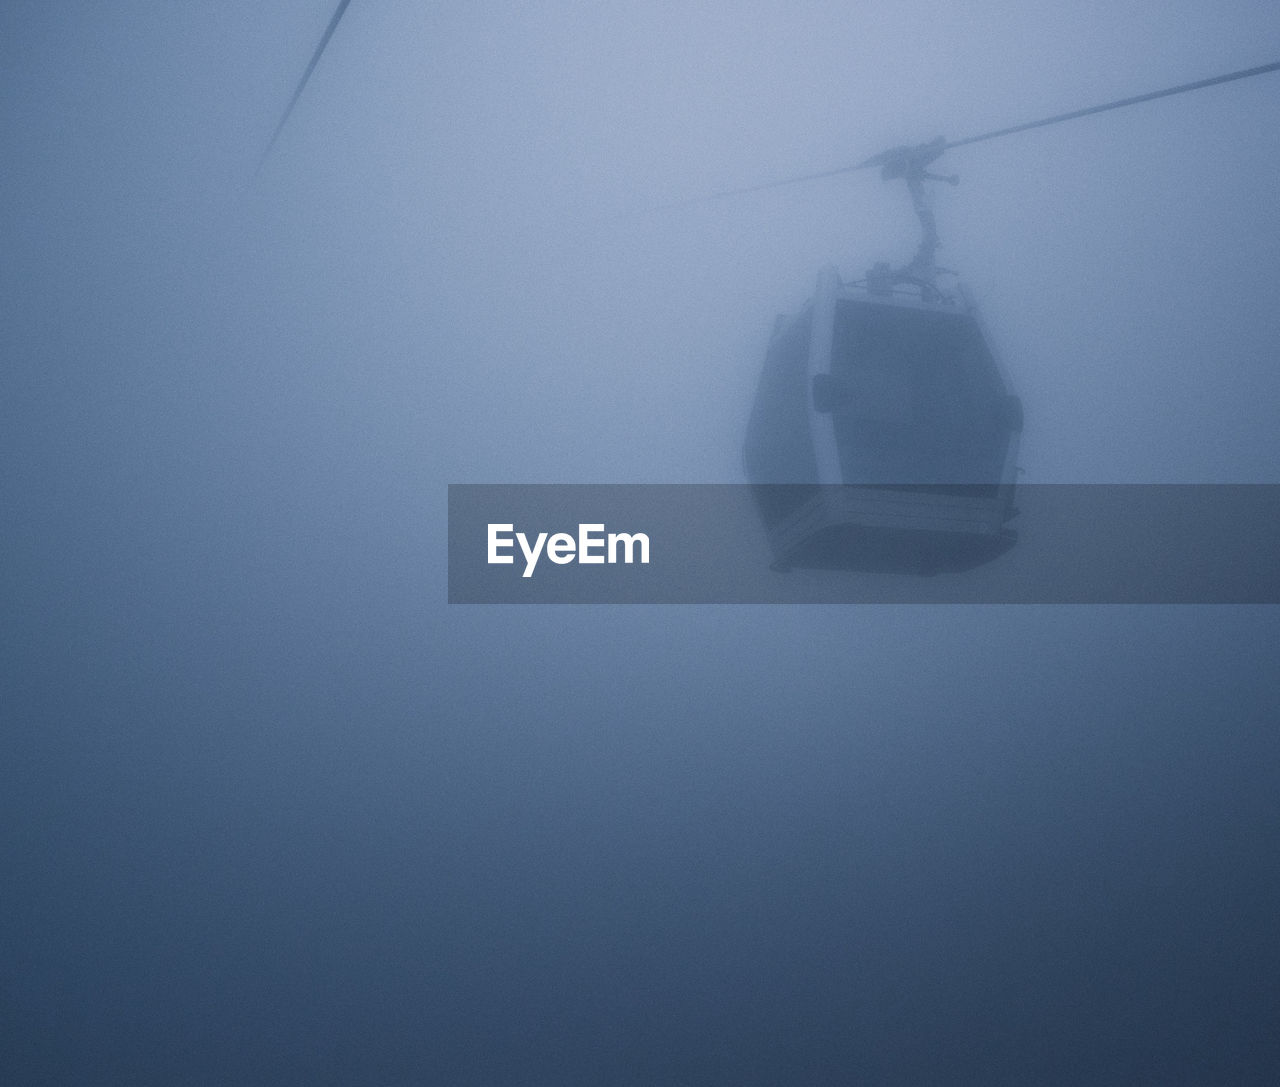 Low angle view of overhead cable car during foggy weather